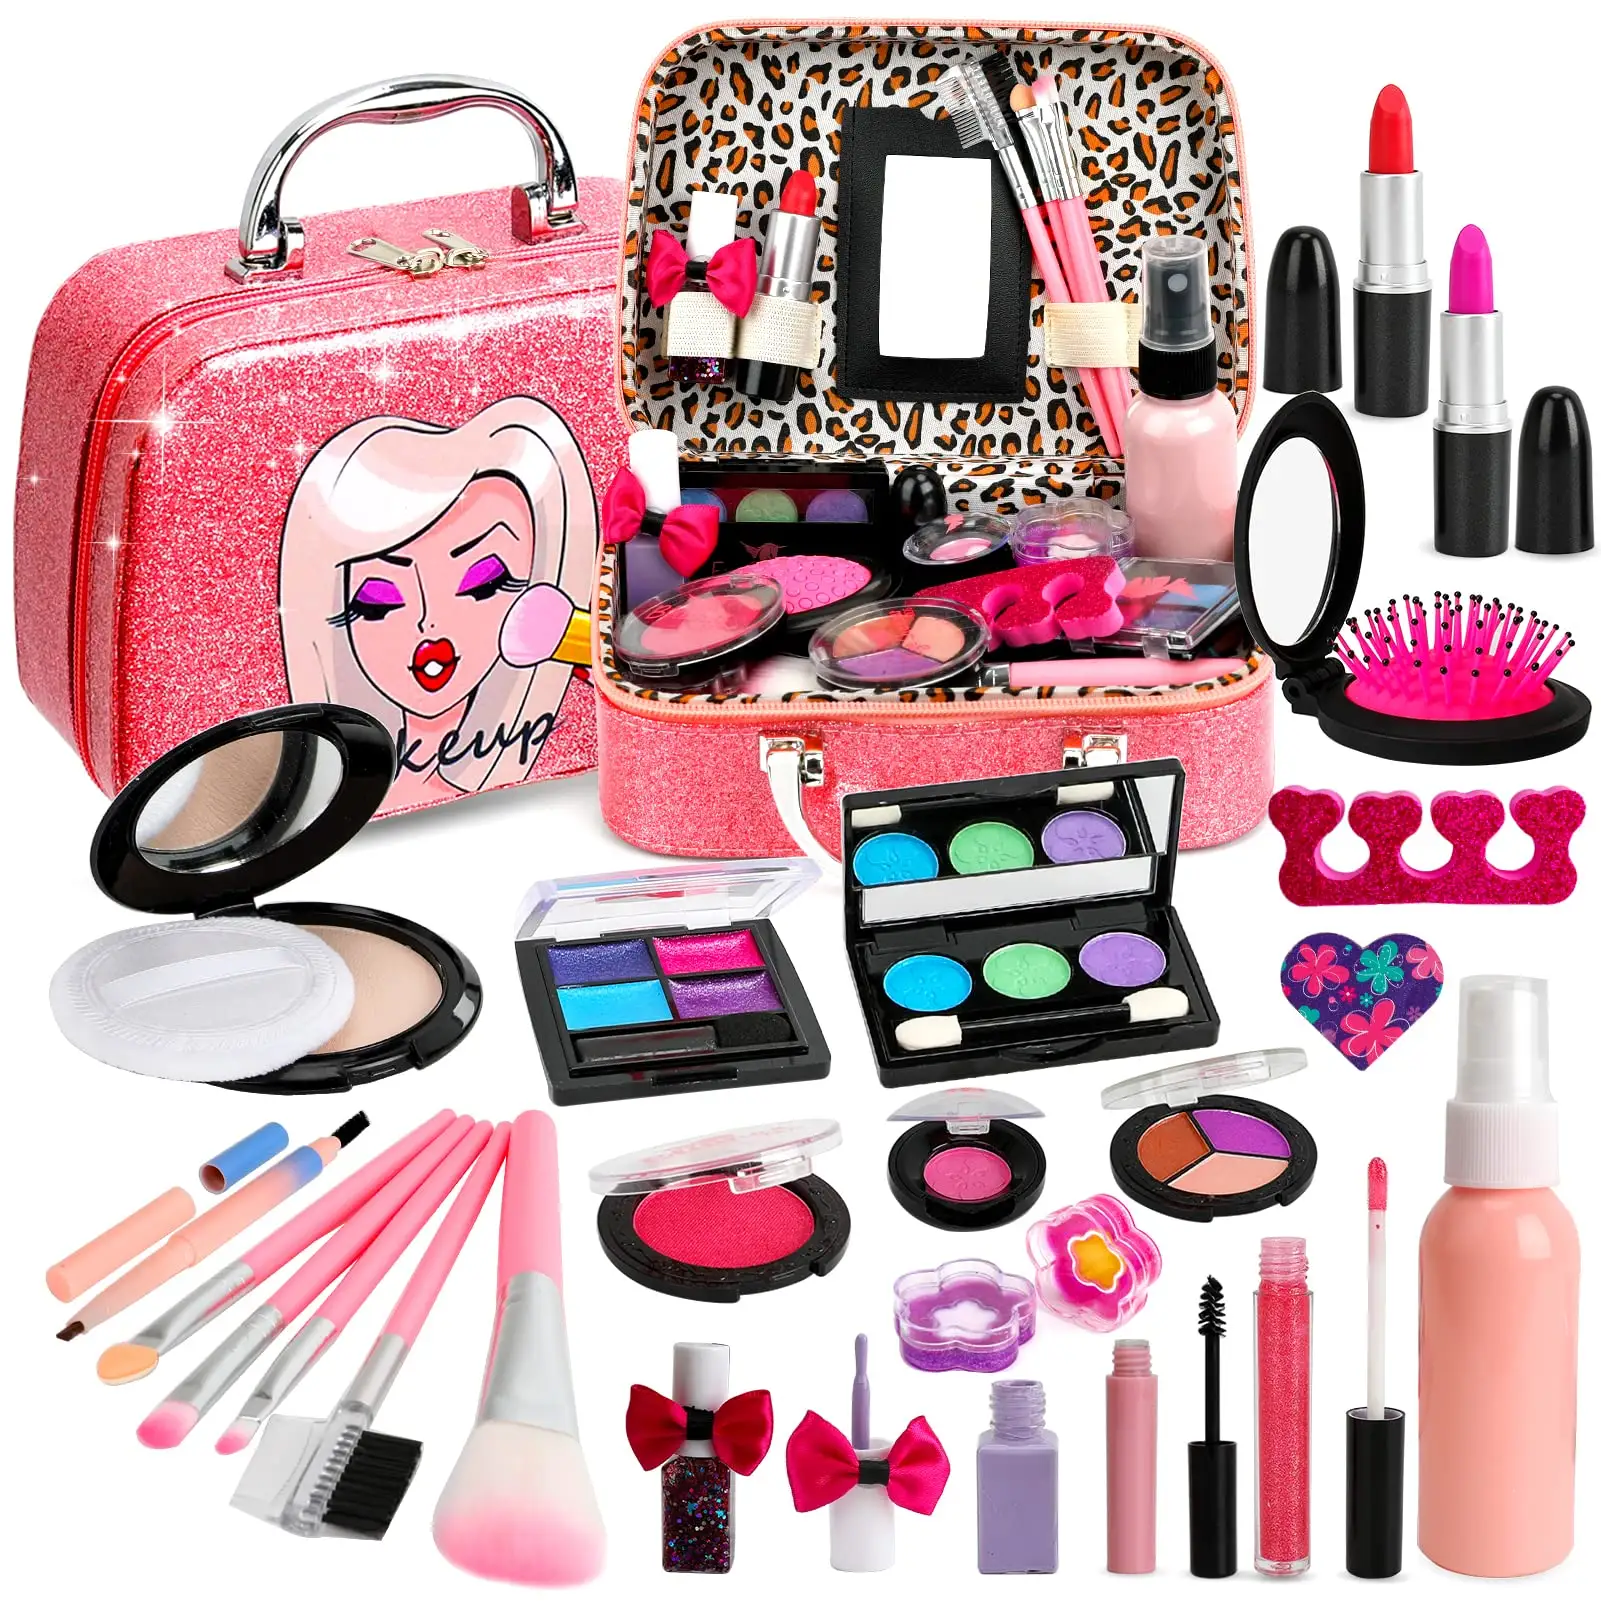 41 Pcs Kids Makeup Toy Kit for Girls, Washable Makeup Set Toy with